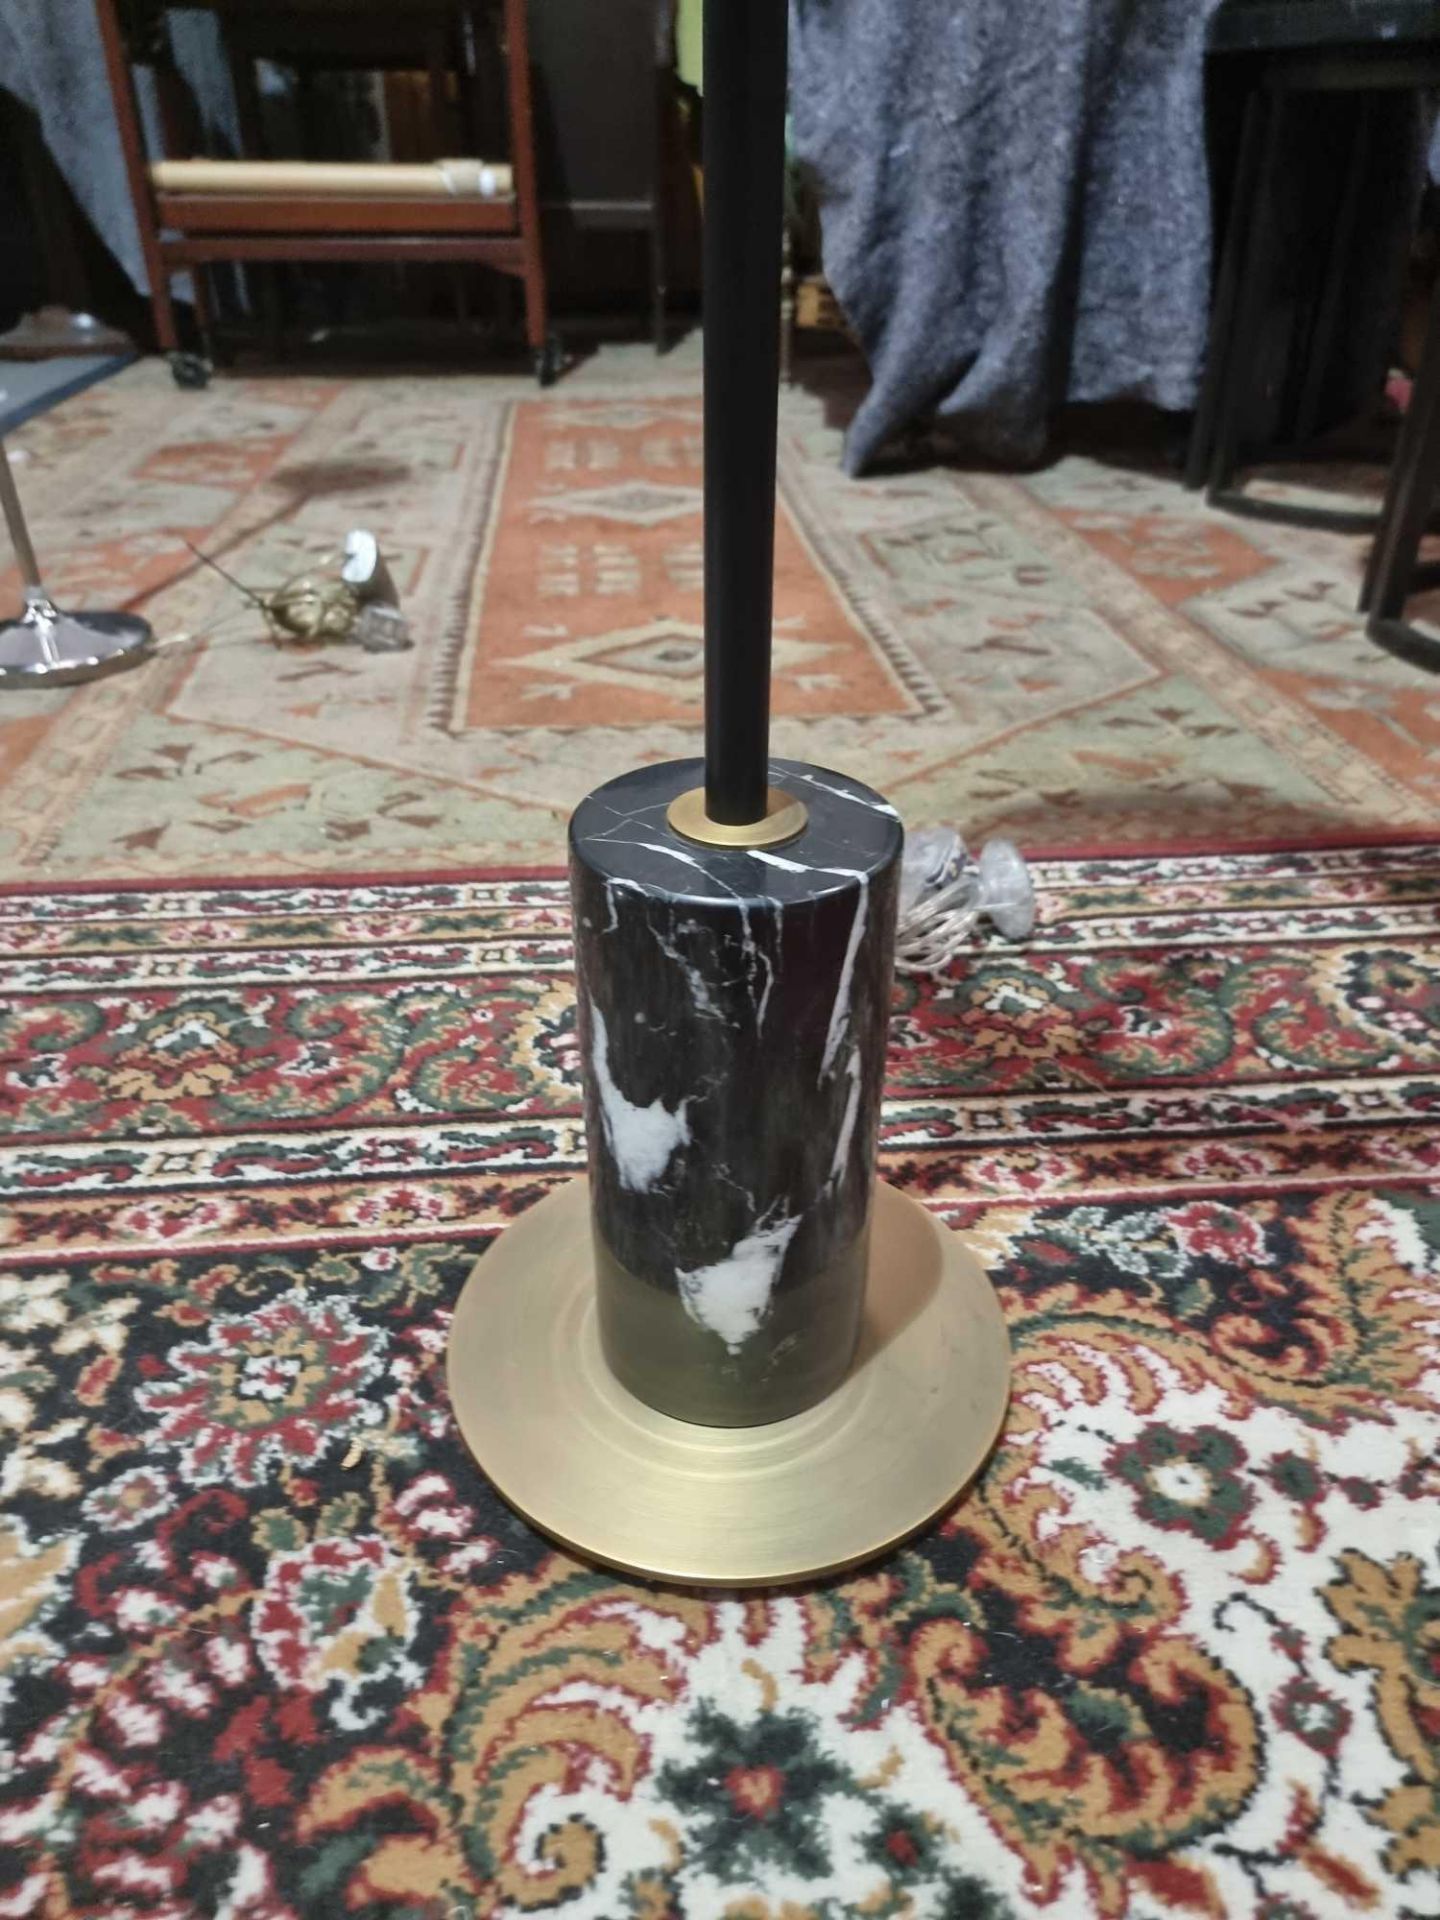 R V Astley Alix Floor Lamp - Antique Brass And Black Marble, Black And Antique Brass Floor Lamp W - Image 3 of 5